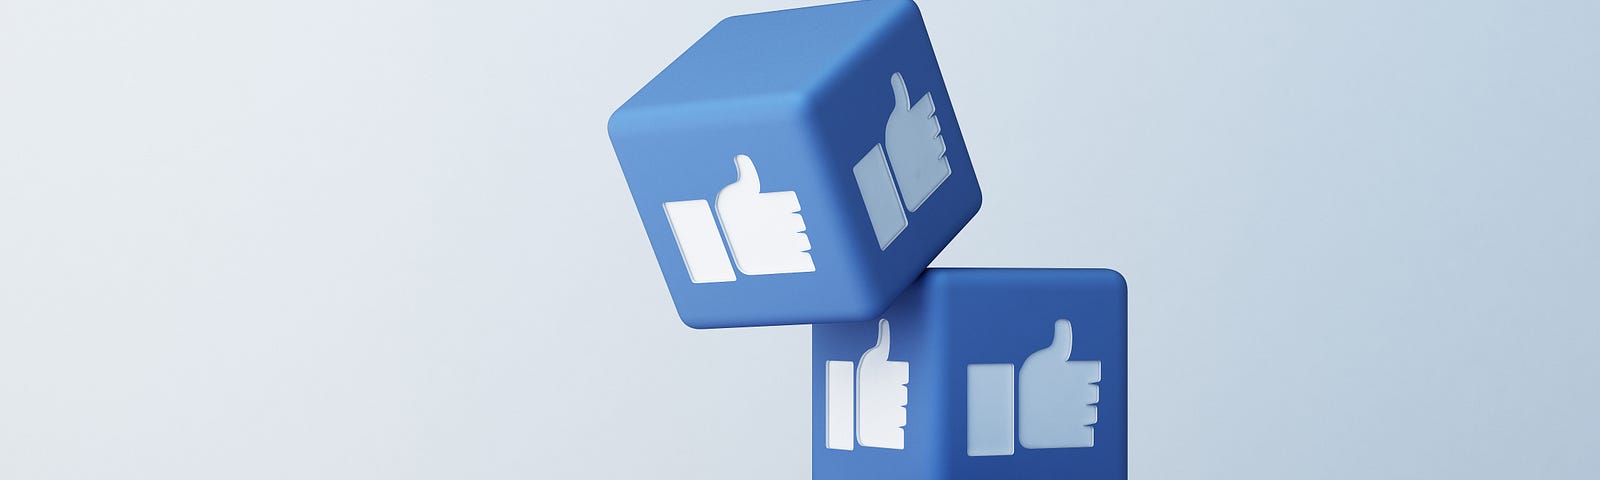 Thumbs up icons on Facebook. I never ‘Liked’ Facebook.